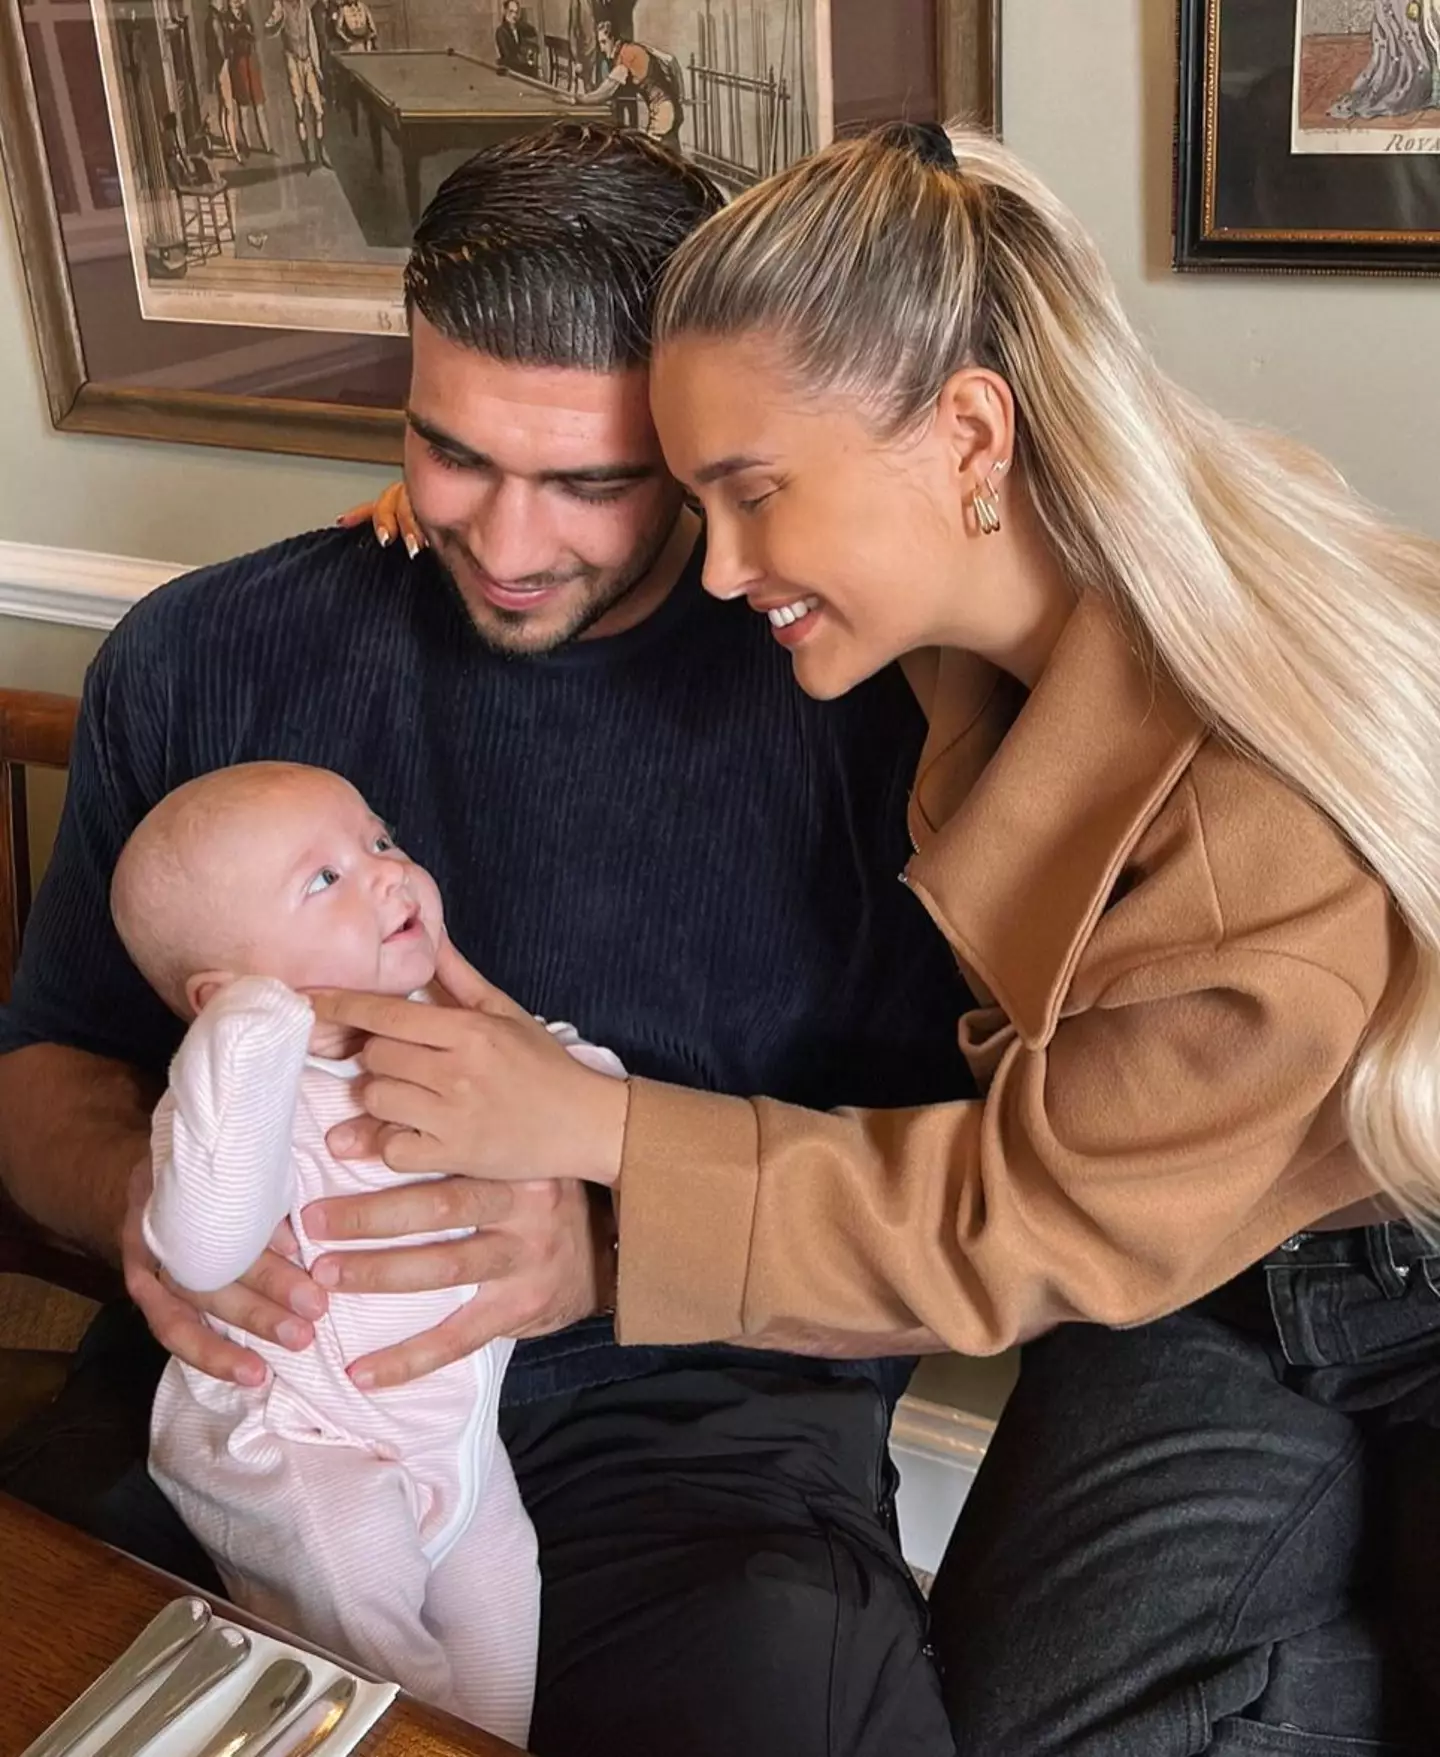 Molly-Mae and Tommy have been together since Love Island in 2019.